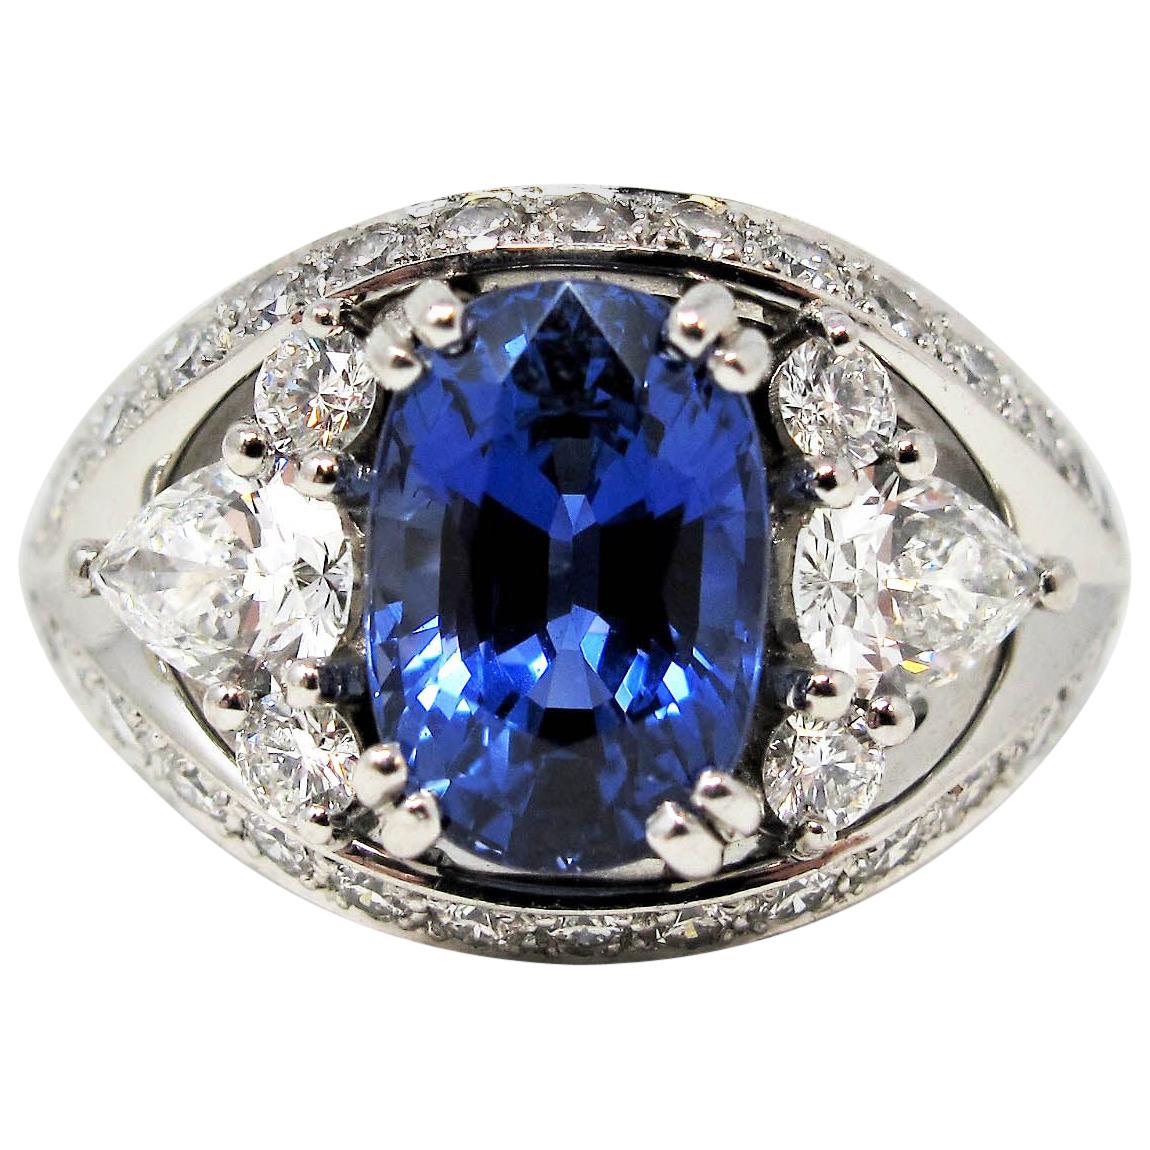 3.10 Carat Untreated Oval Mixed Cut Sapphire and Diamond Ring in Platinum For Sale